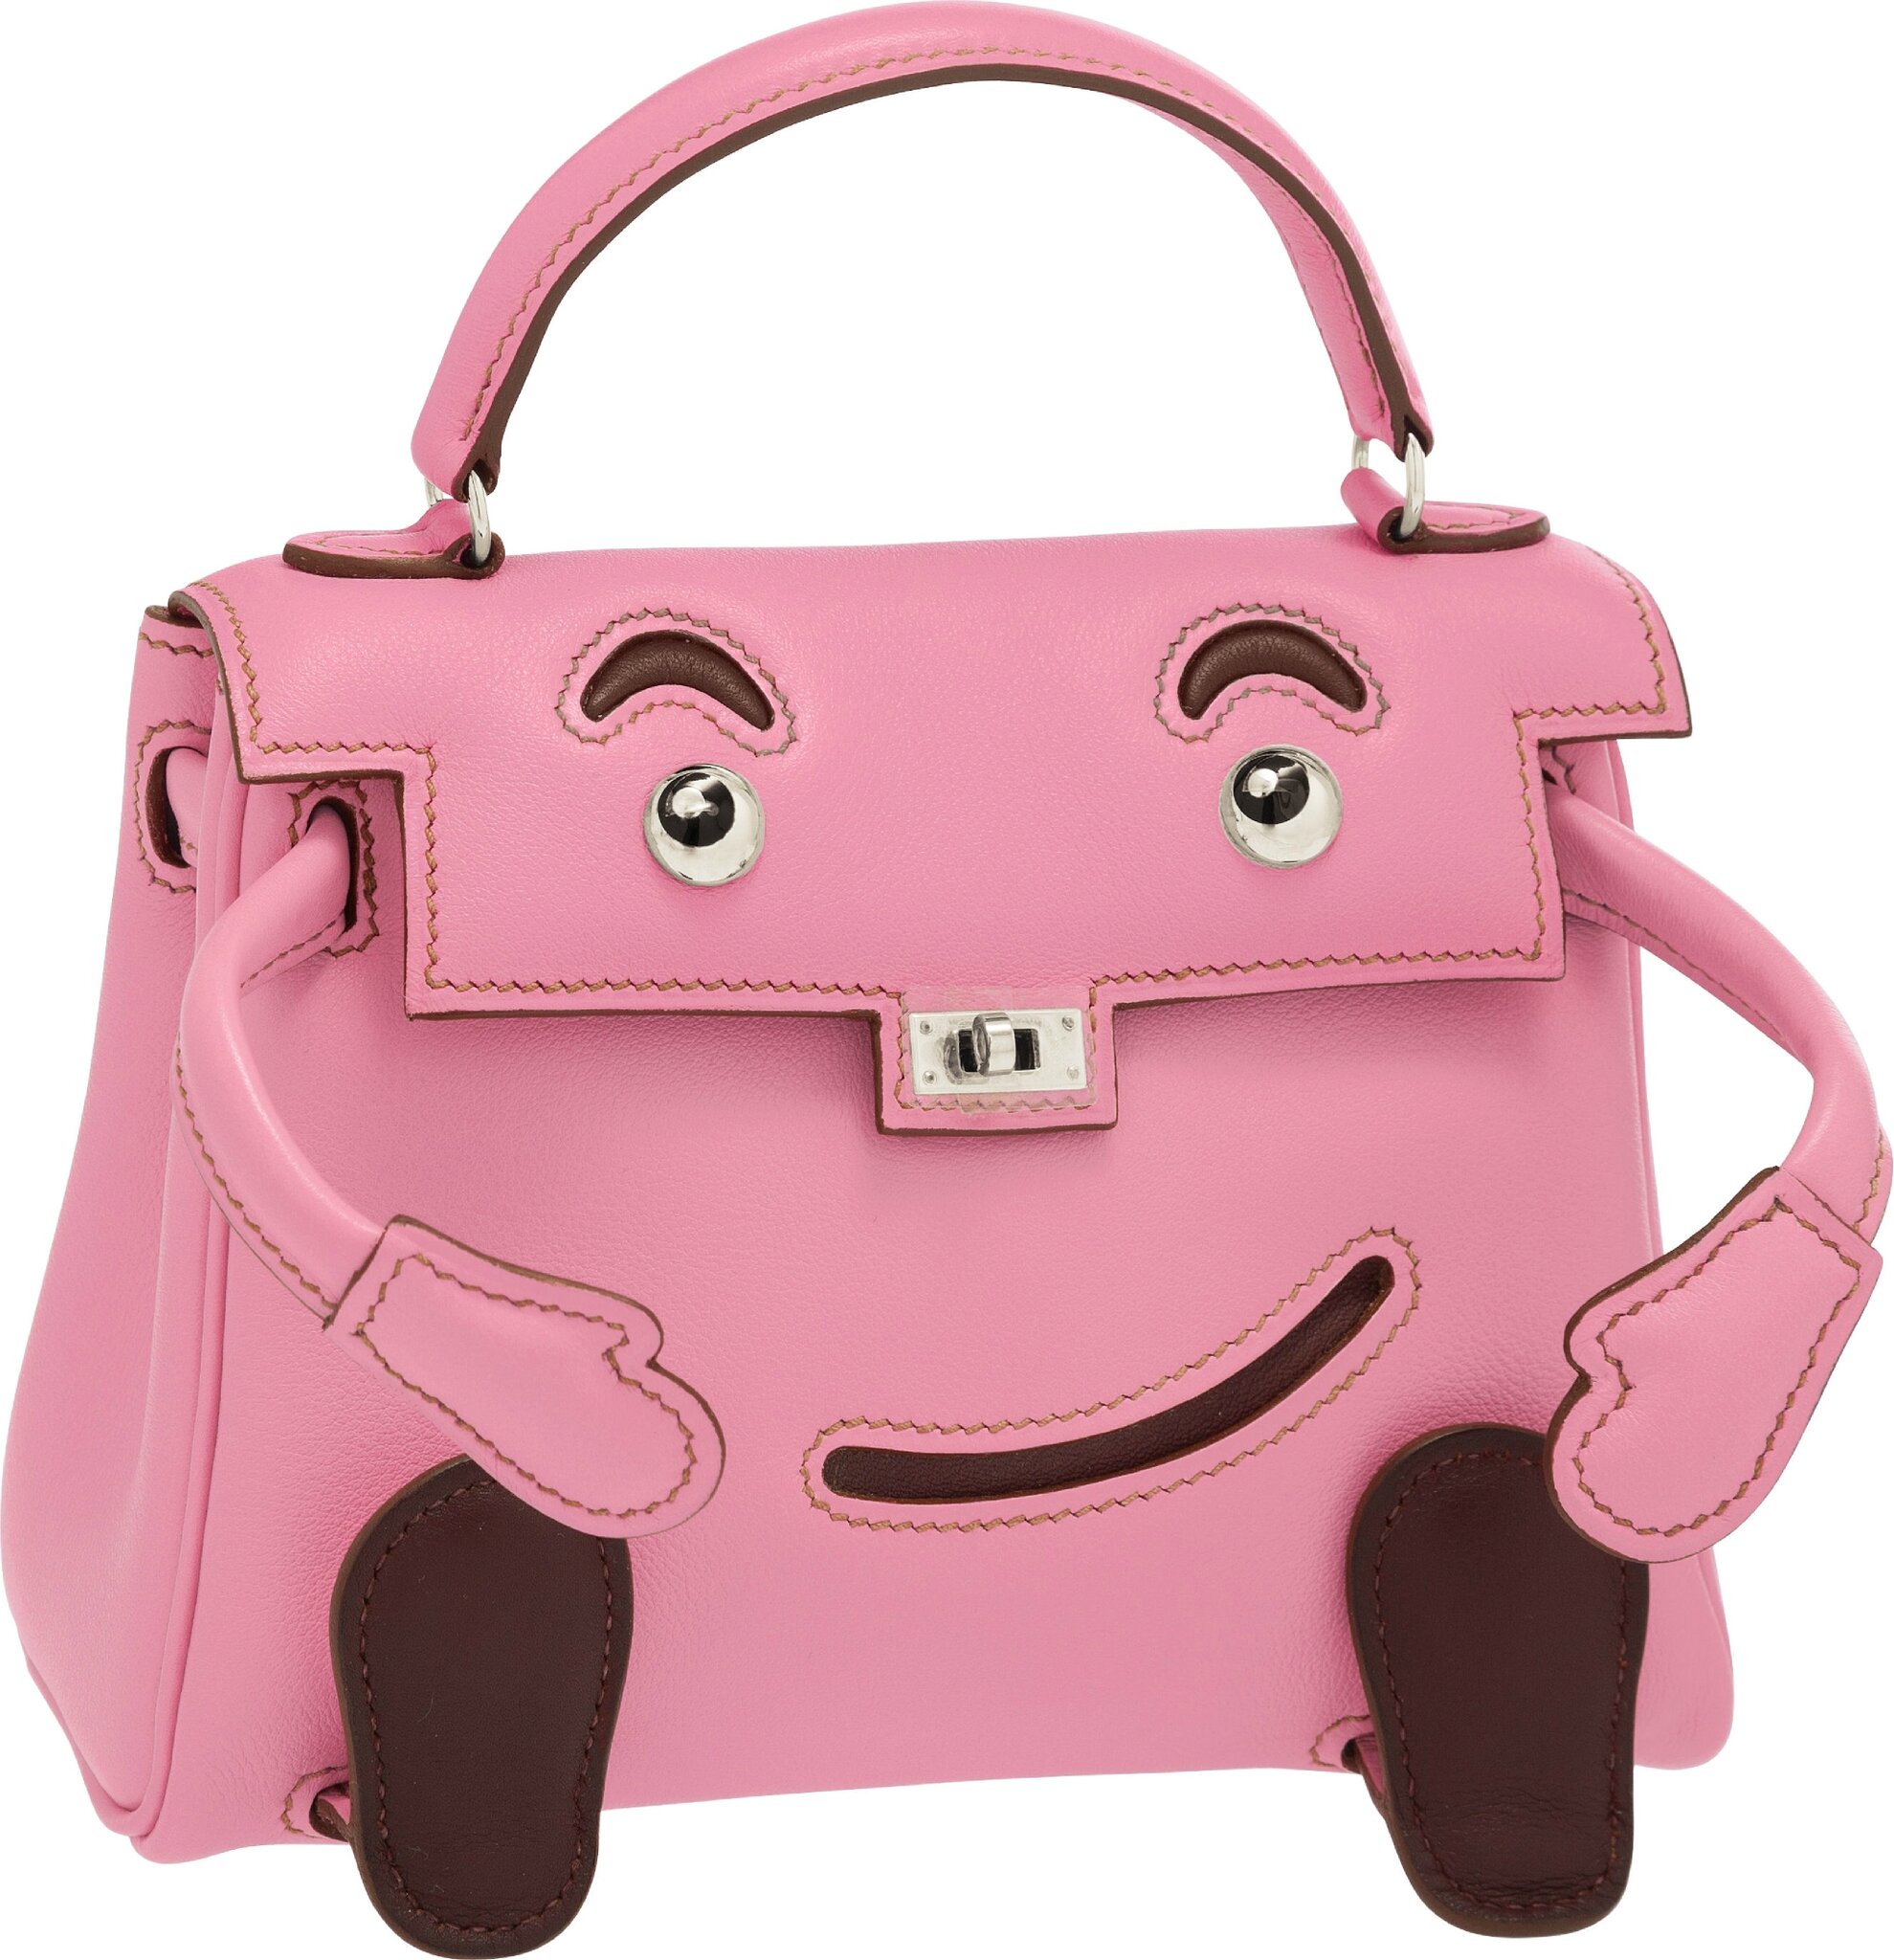 Why Does Hermès Produce Pink Bags With Palladium Hardware Instead of Gold  Hardware?